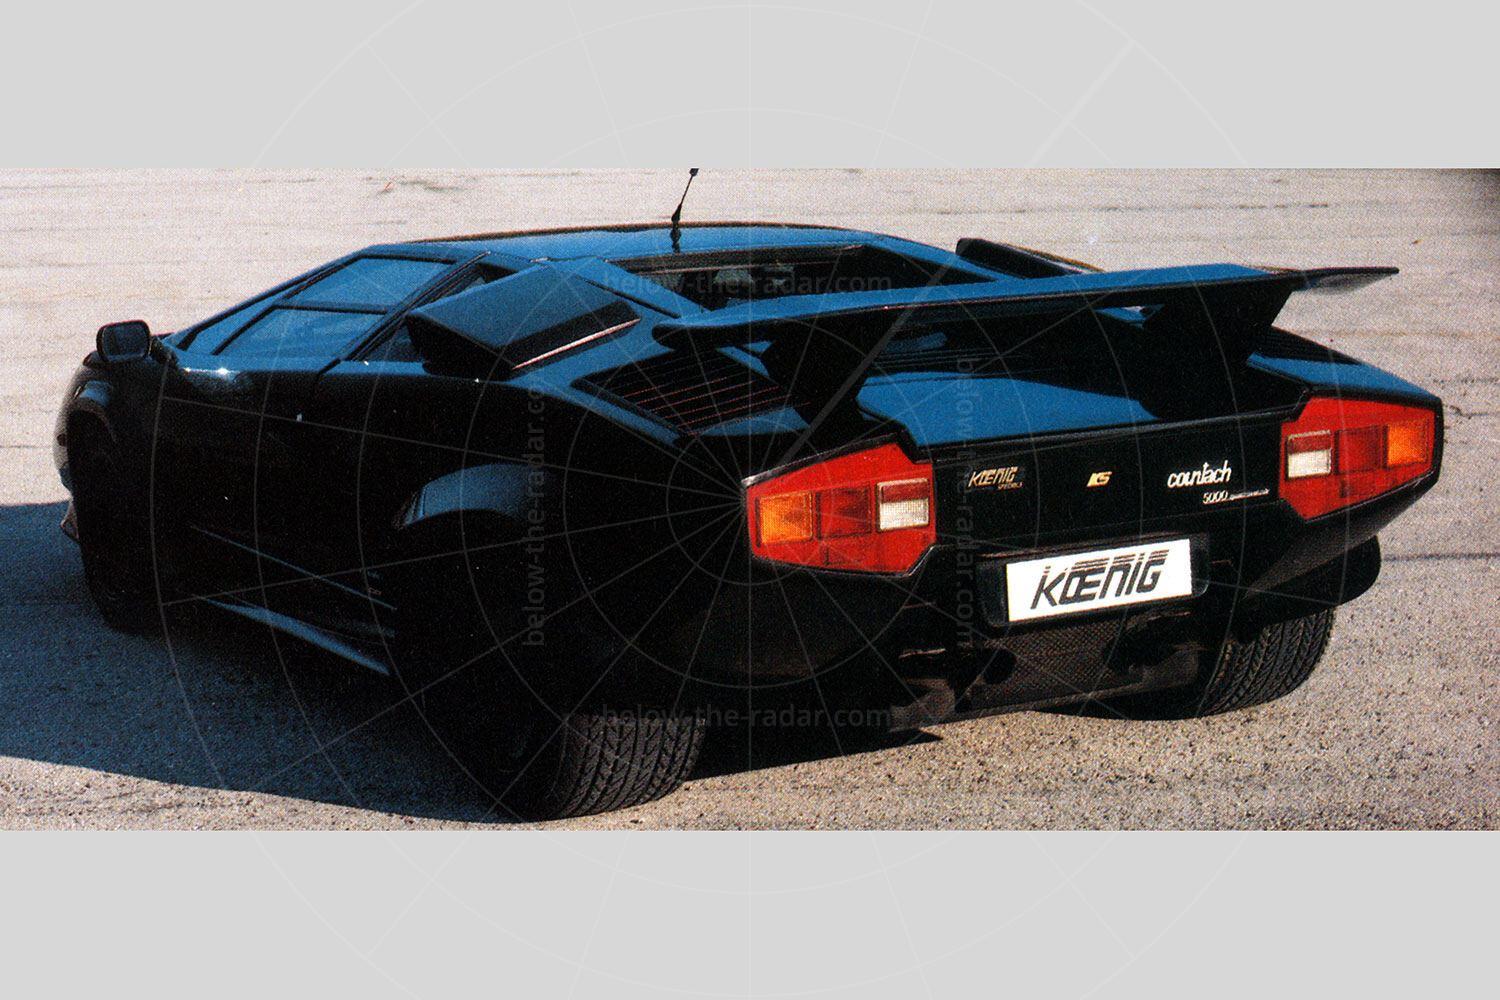 The story of the Lamborghini Countach by Koenig on Below The Radar